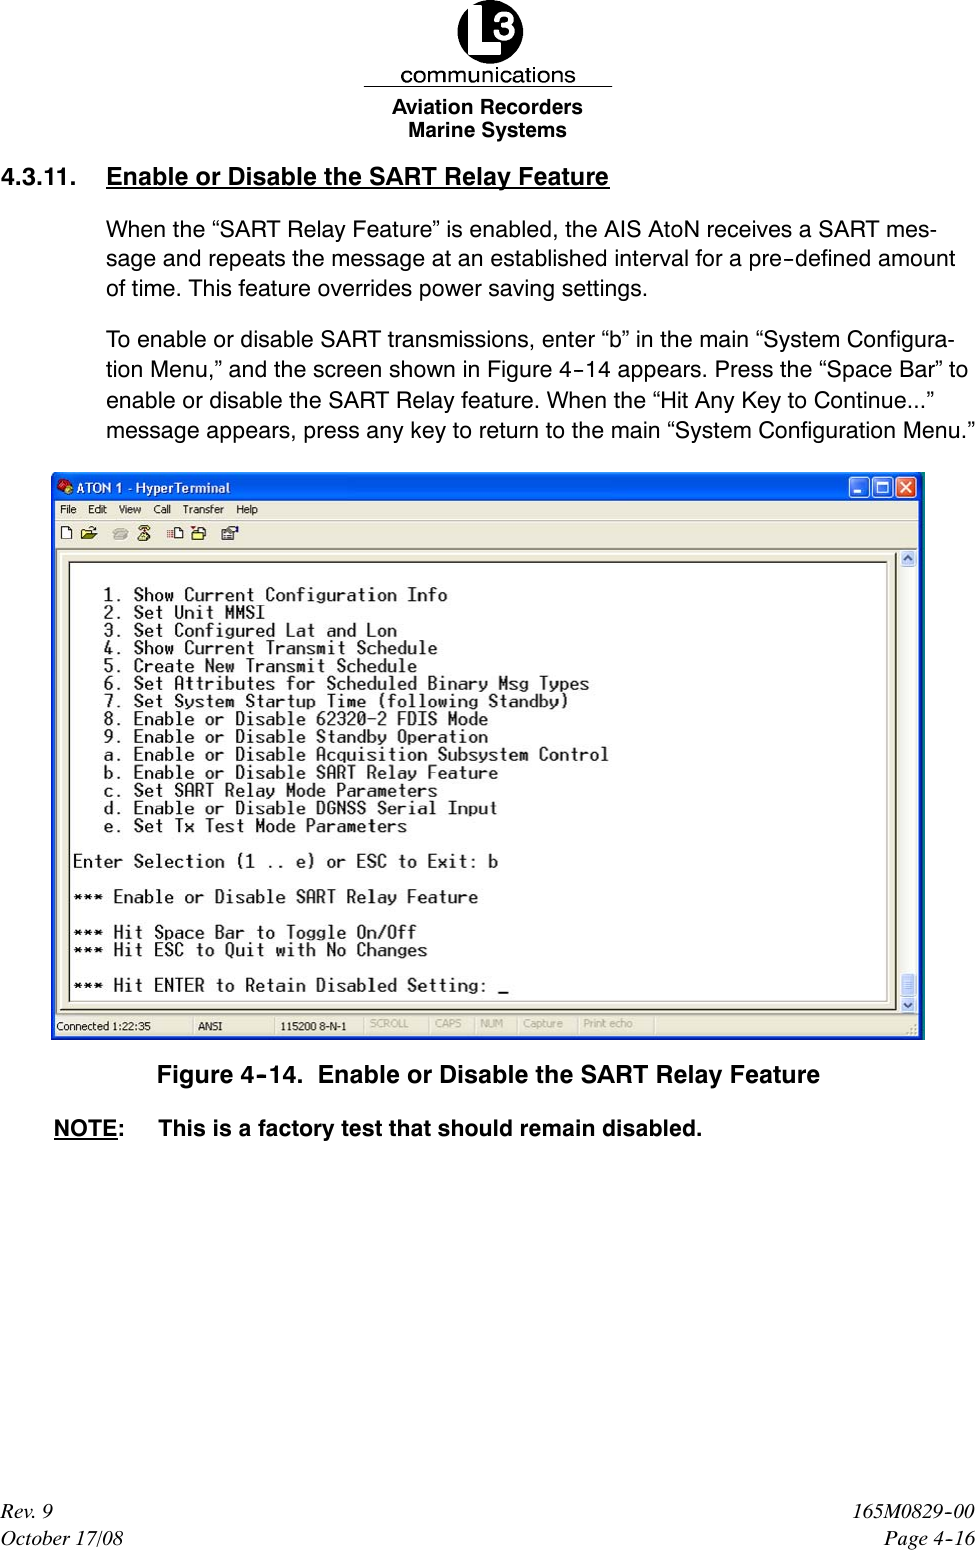 Marine SystemsAviation RecordersPage 4--16165M0829--00Rev. 9October 17/084.3.11. Enable or Disable the SART Relay FeatureWhen the “SART Relay Feature” is enabled, the AIS AtoN receives a SART mes-sage and repeats the message at an established interval for a pre--defined amountof time. This feature overrides power saving settings.To enable or disable SART transmissions, enter “b” in the main “System Configura-tion Menu,” and the screen shown in Figure 4--14 appears. Press the “Space Bar” toenable or disable the SART Relay feature. When the “Hit Any Key to Continue...”message appears, press any key to return to the main “System Configuration Menu.”Figure 4--14. Enable or Disable the SART Relay FeatureNOTE: This is a factory test that should remain disabled.